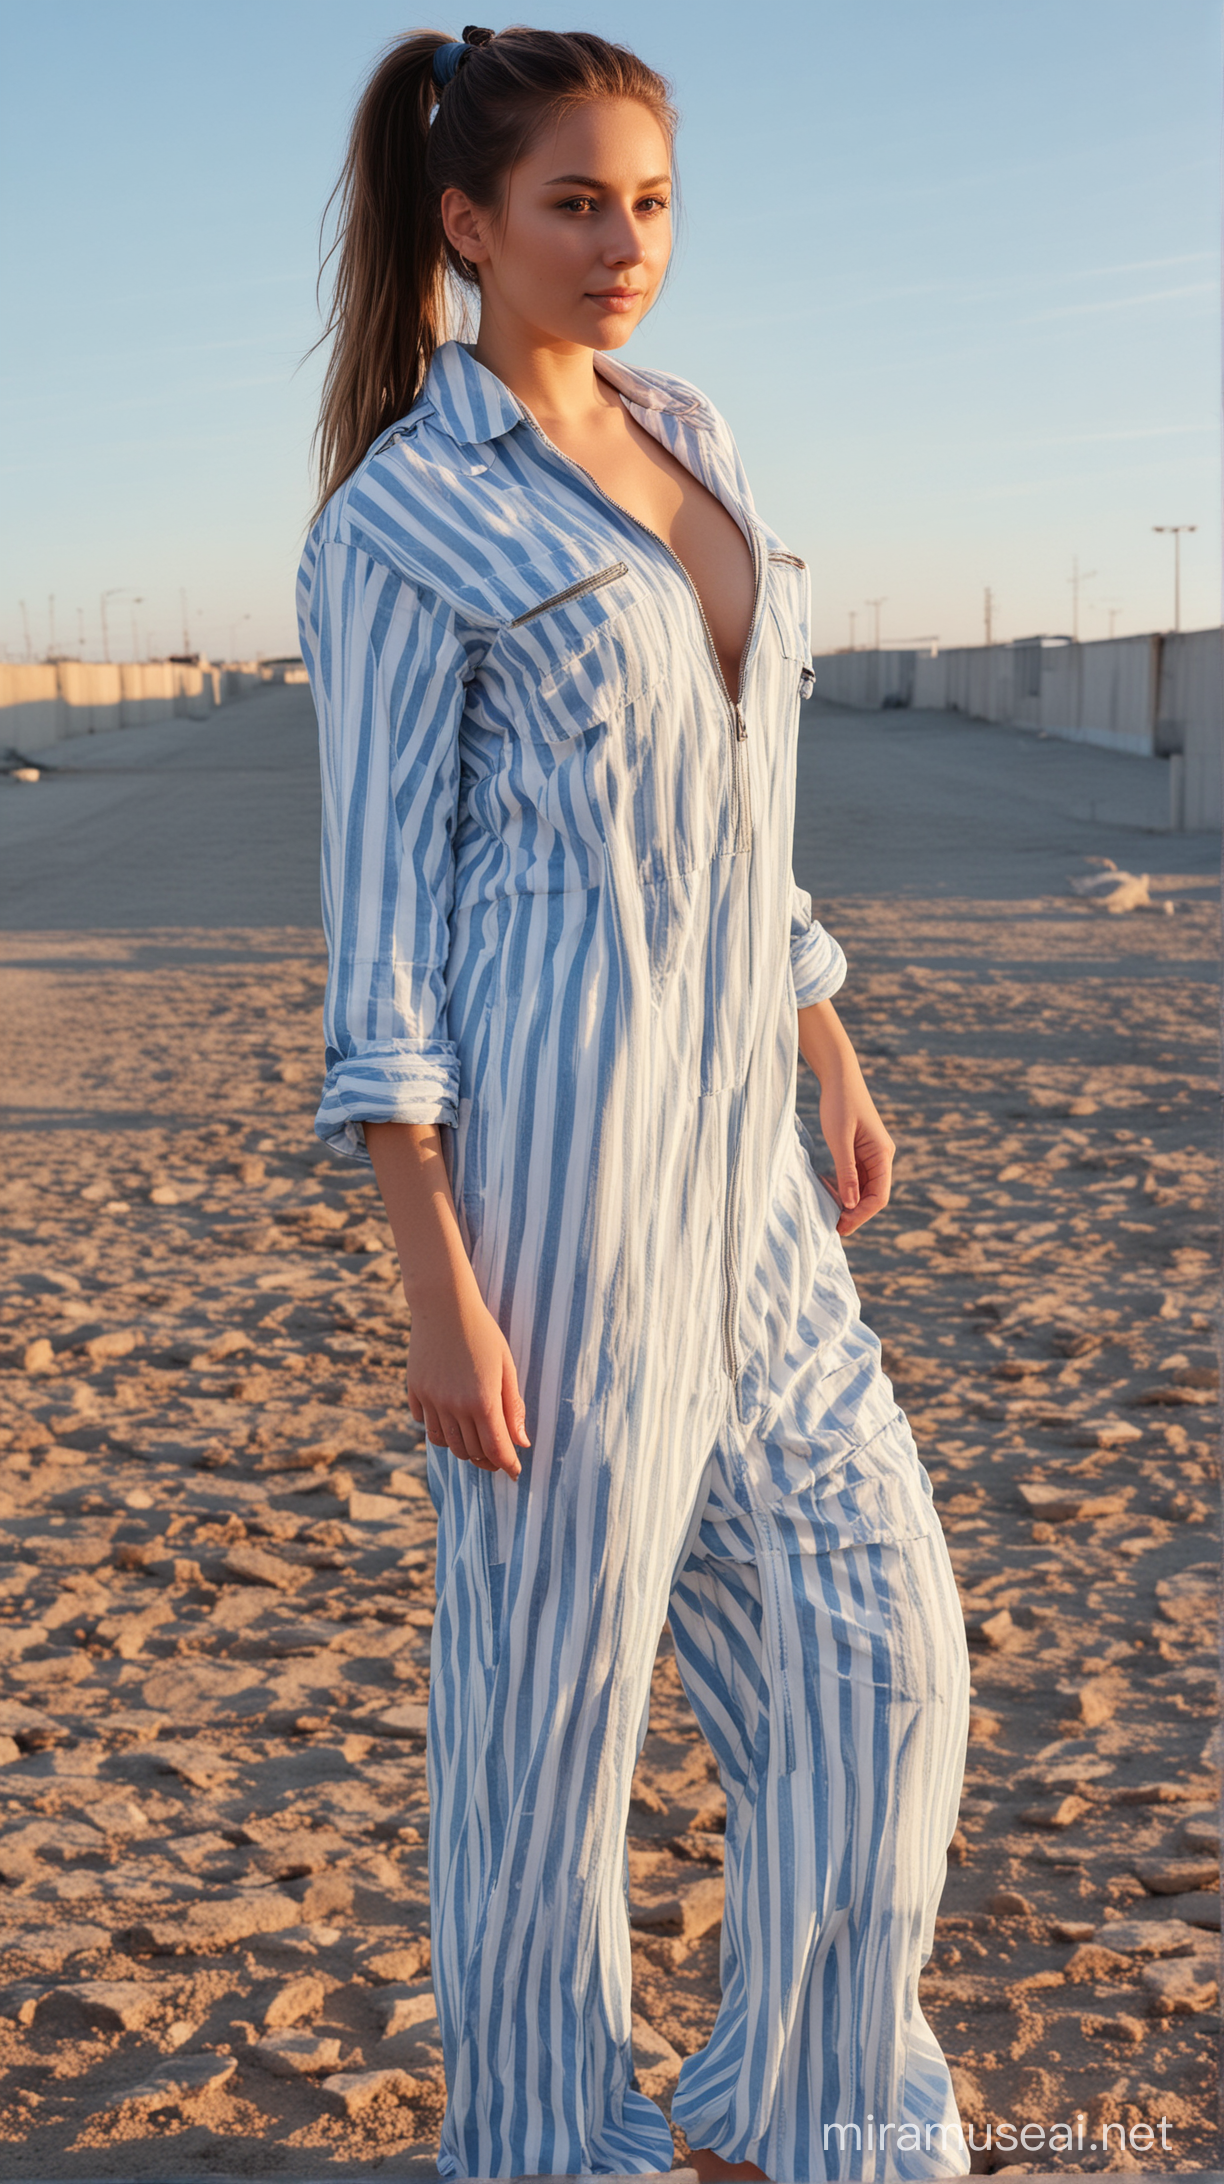 Young busty female prisoner in the prison jumpsuit watching sun set. European, shy smile, barefoot, hair in a ponytail, partly visible naked breasts. (Jumpsuit: with wide white and pastel blue vertical stripes, made of crumpled fabric in outdoor fashion style with many zippers and pockets, with long sleeves and a very long central zipper). Fully naked under the jumpsuit. 